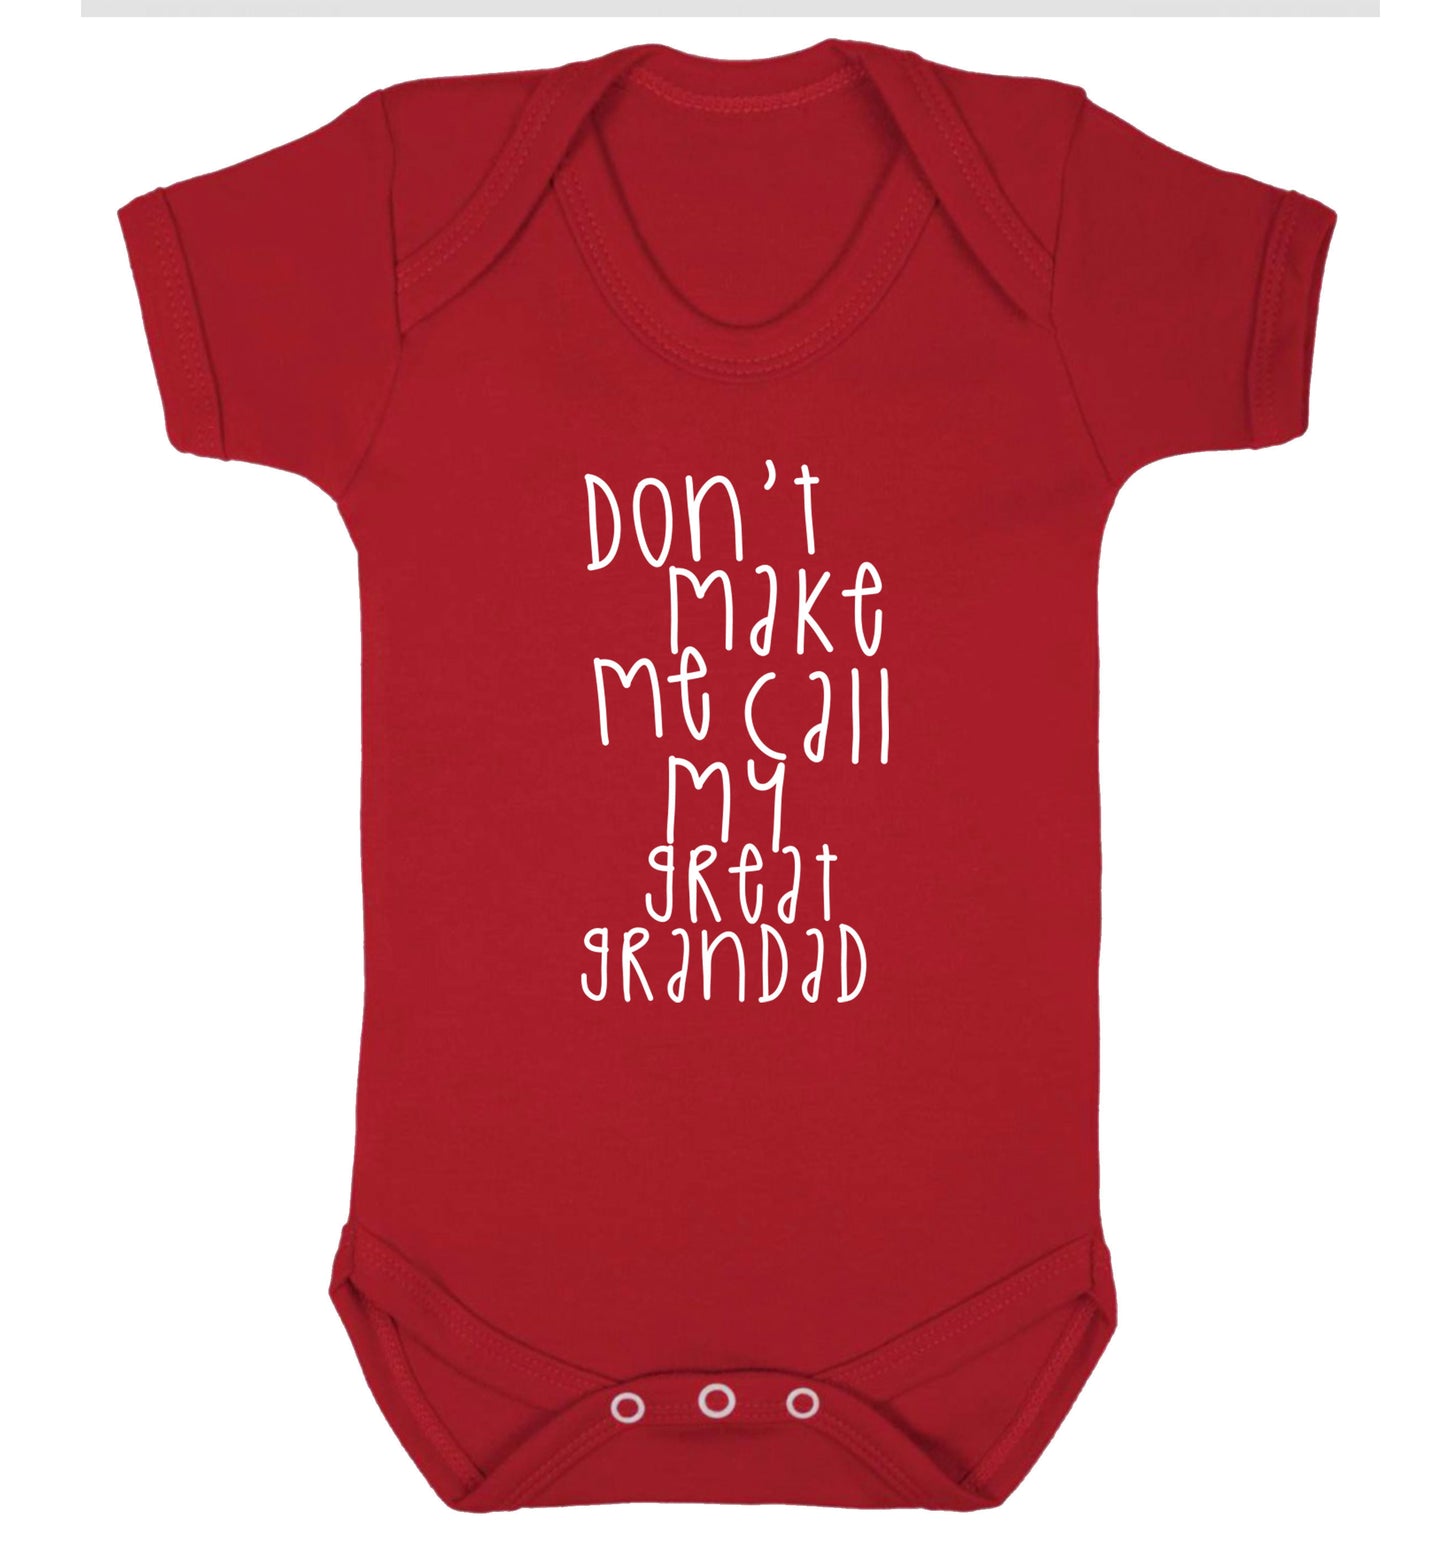 Don't make me call my great grandad Baby Vest red 18-24 months